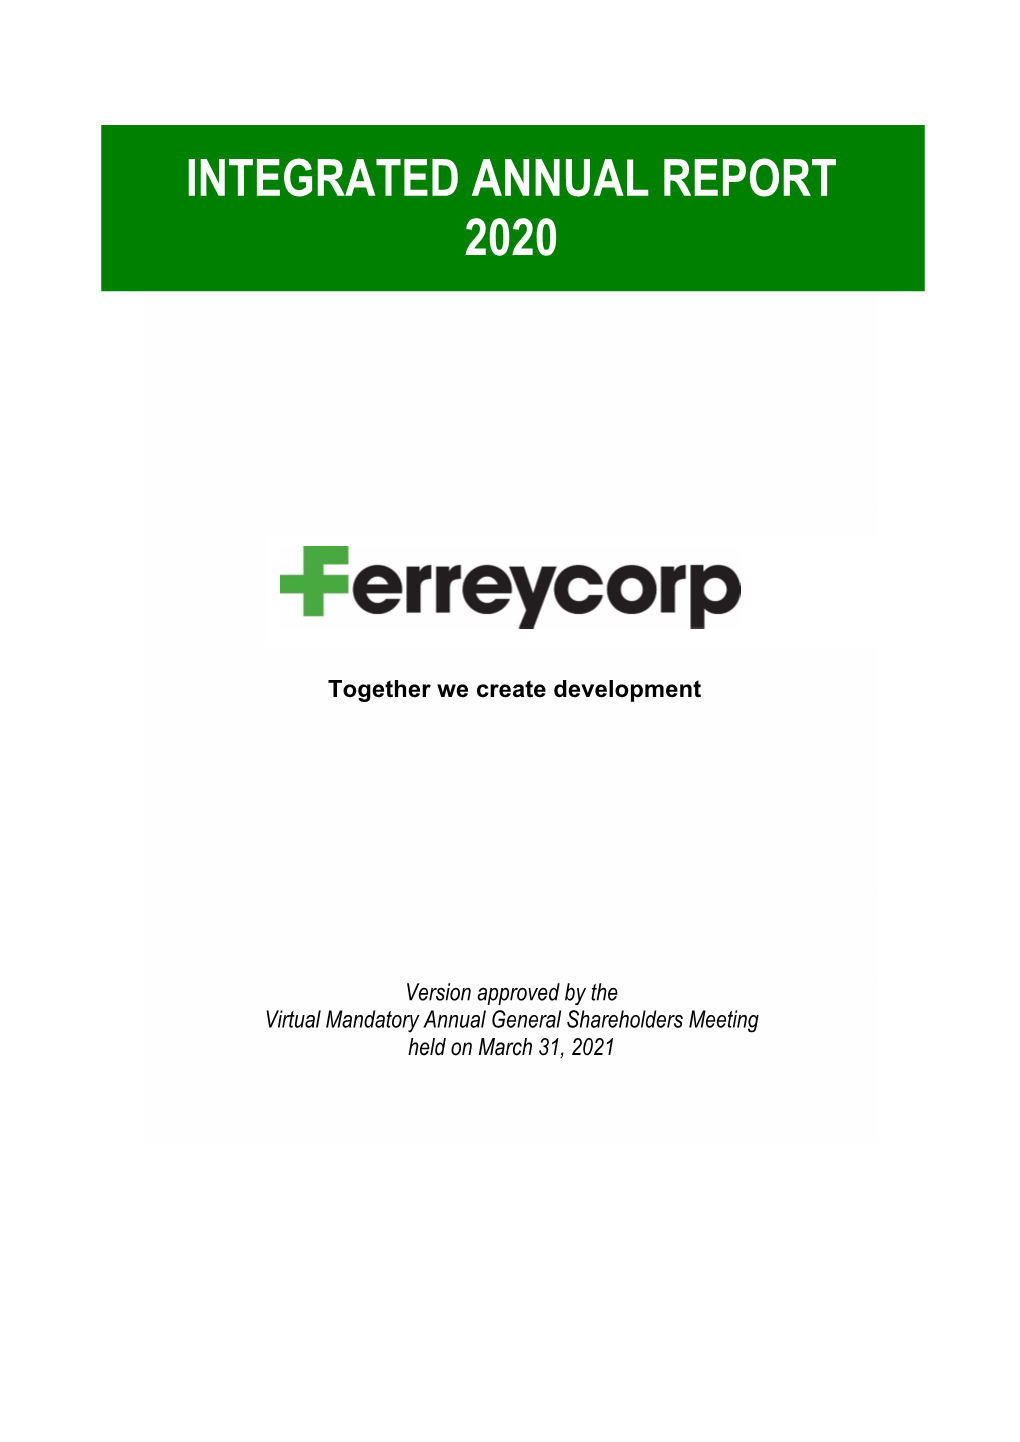 Integrated Annual Report 2020